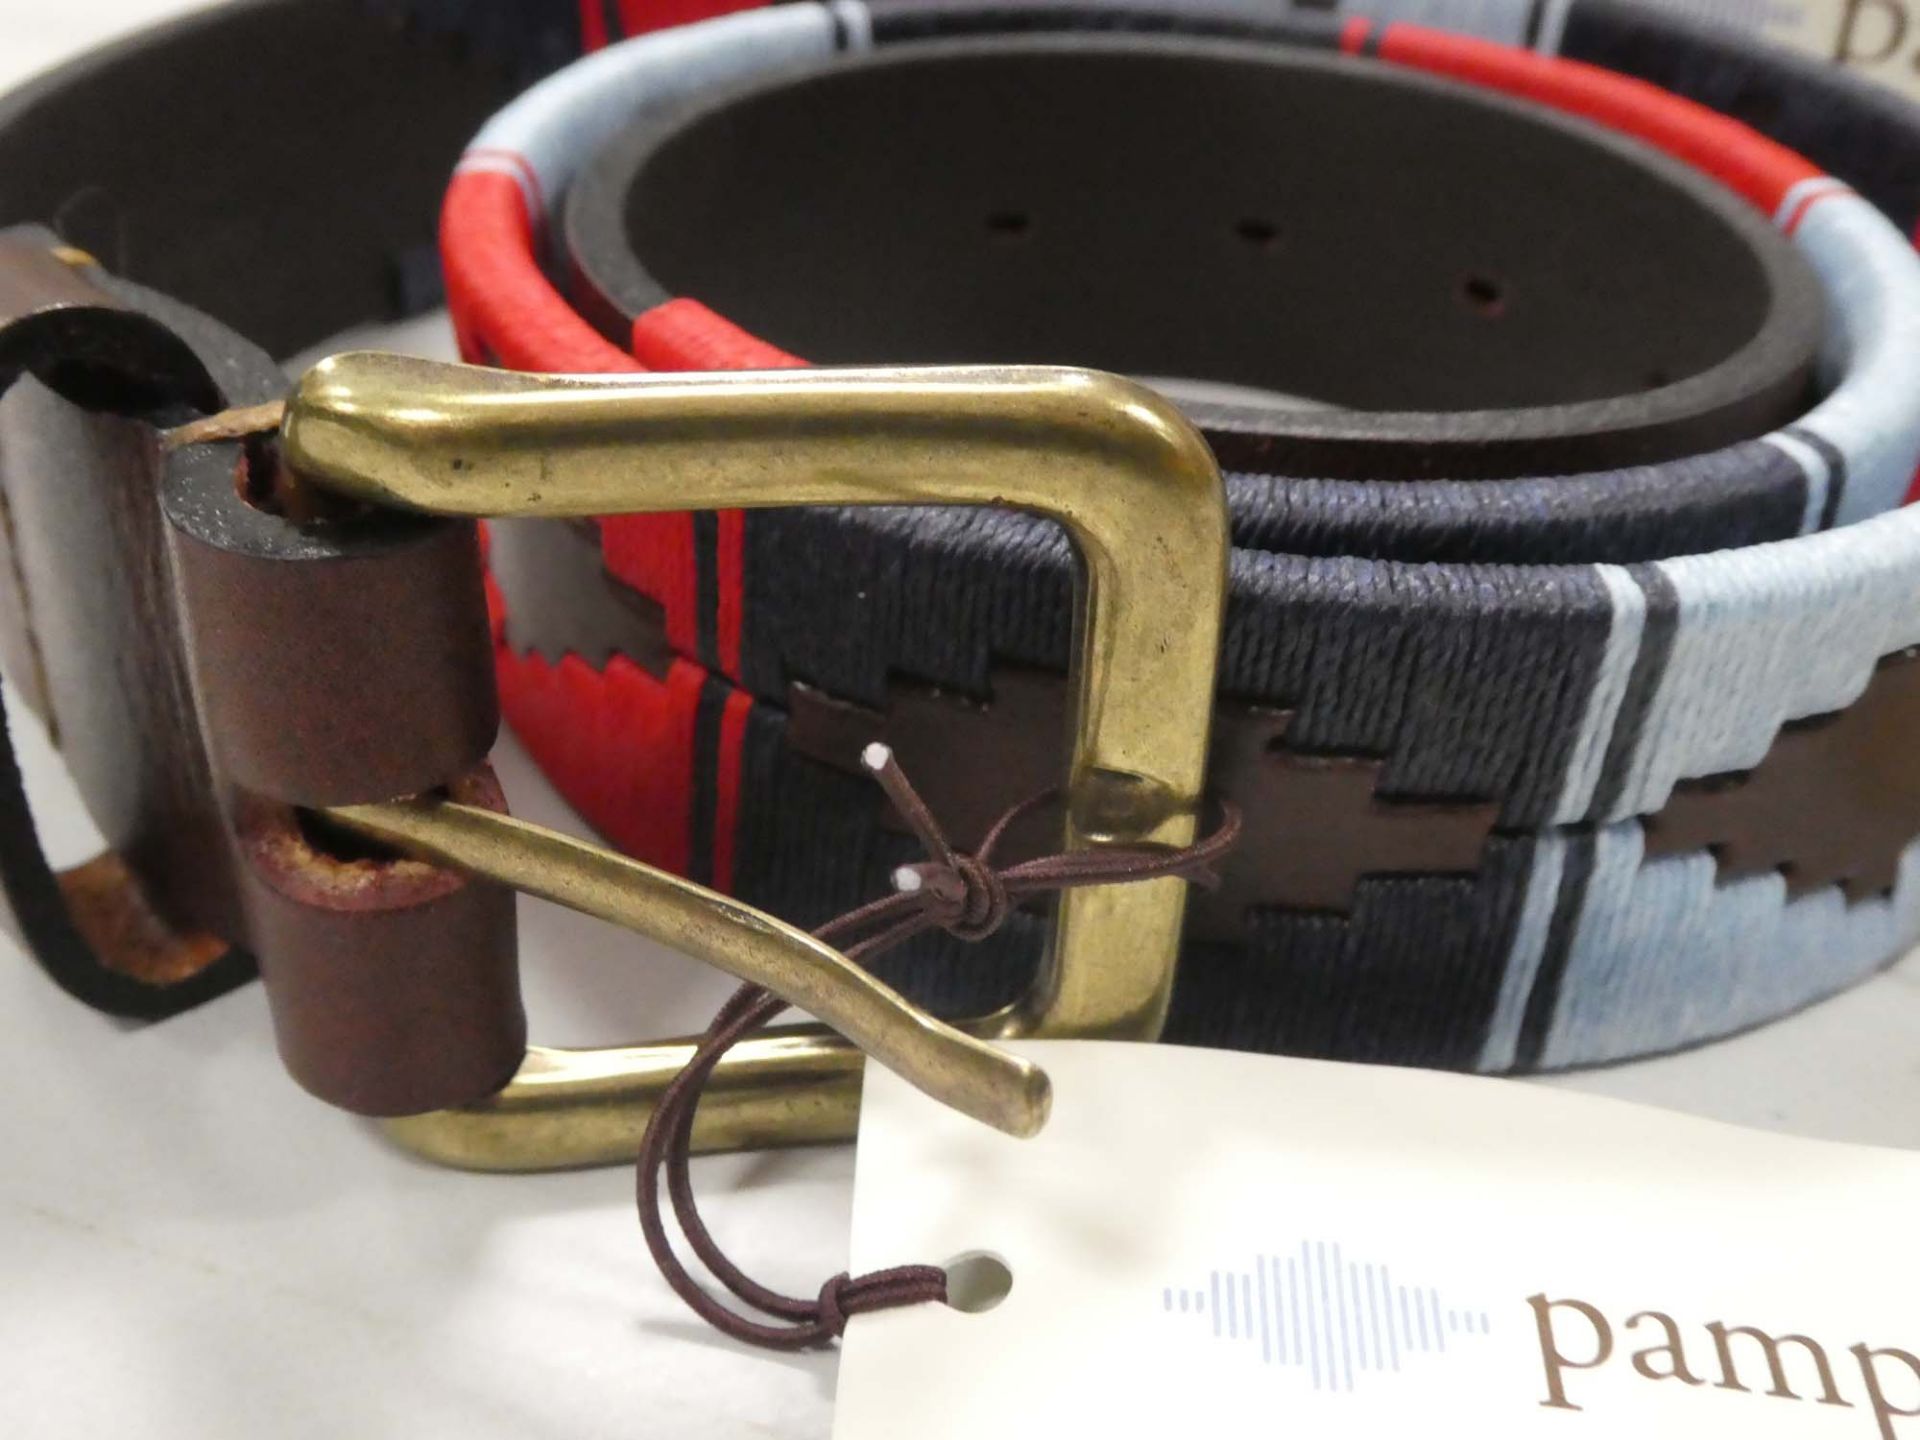 Pampeano genuine leather belt in red / blue size 95 with box - Image 2 of 2